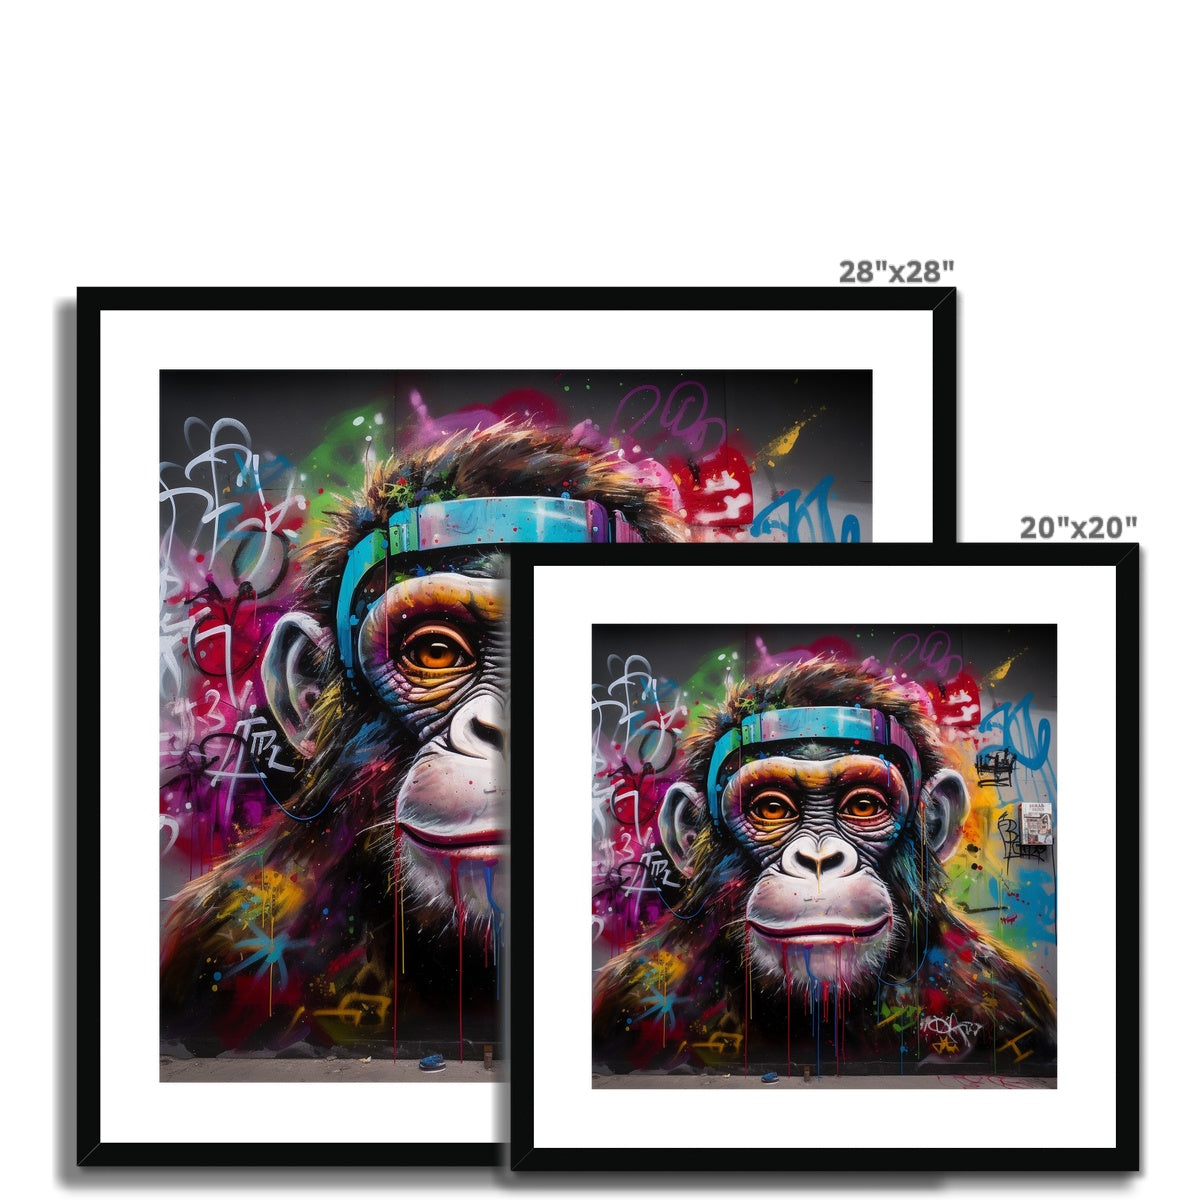 The Don 2.0: Limited Edition Framed & Mounted Print